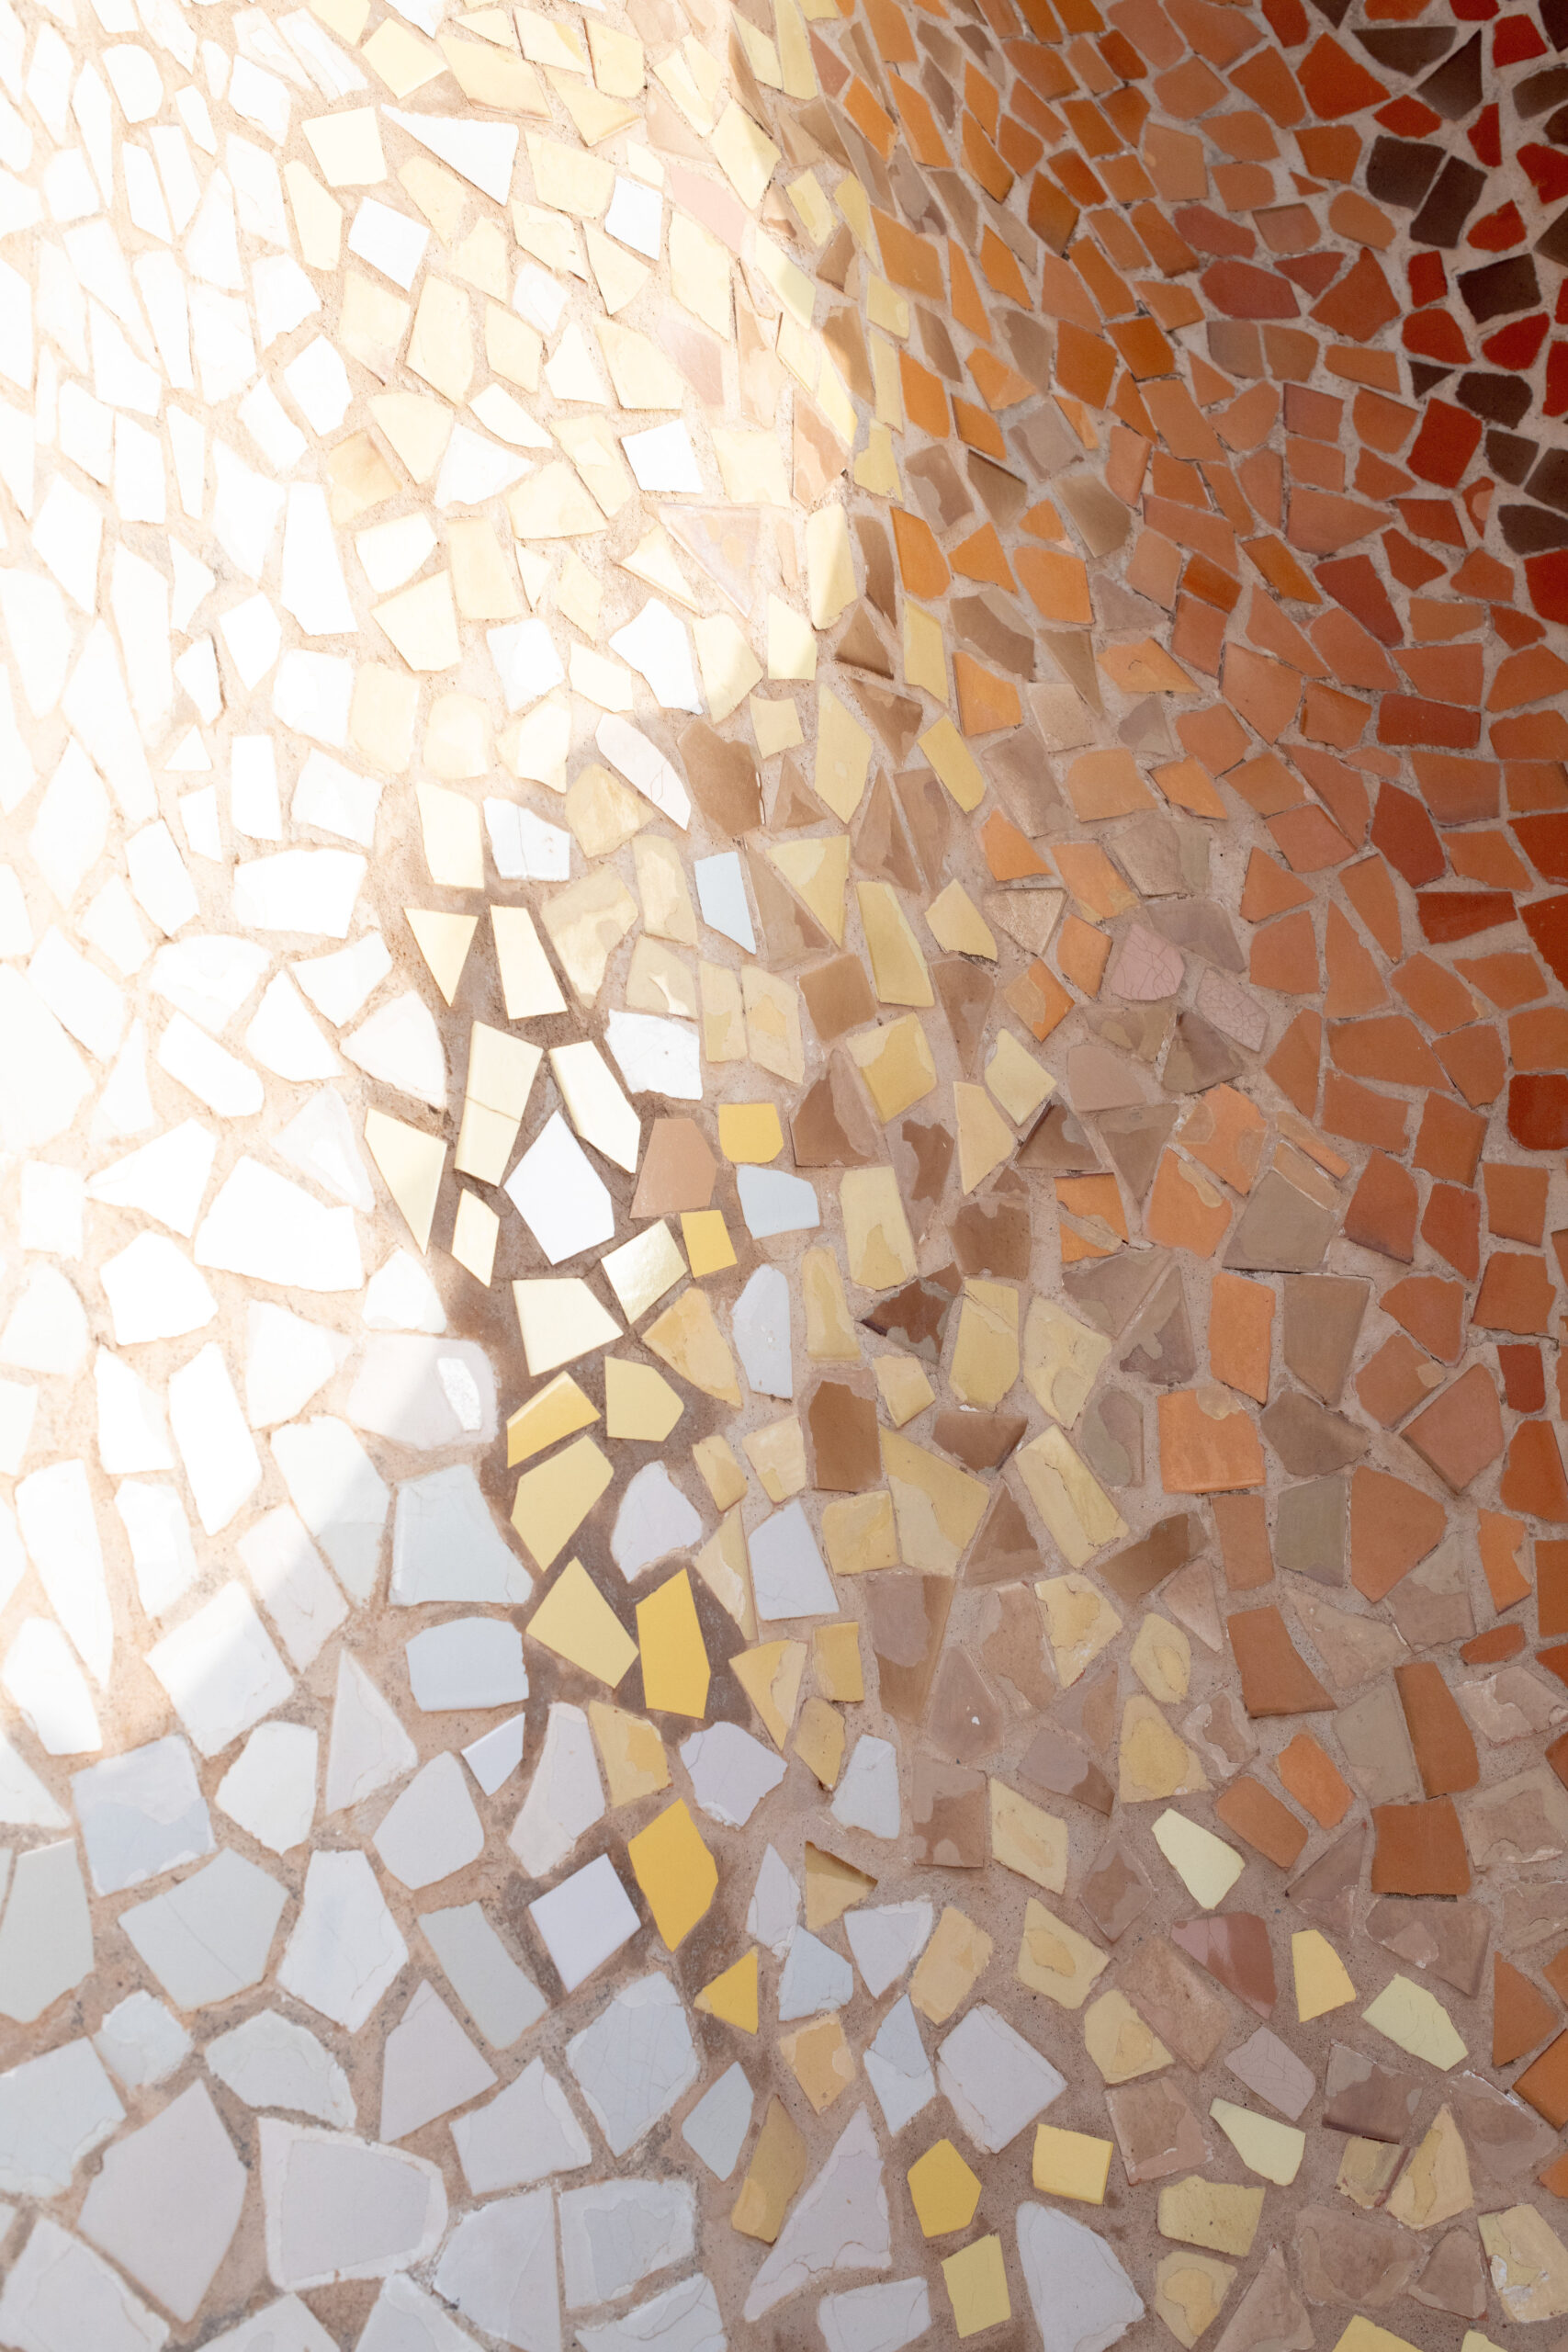 Coco & Voltaire - Mosaic tiles on the roof of Casa Batllo in Barcelona